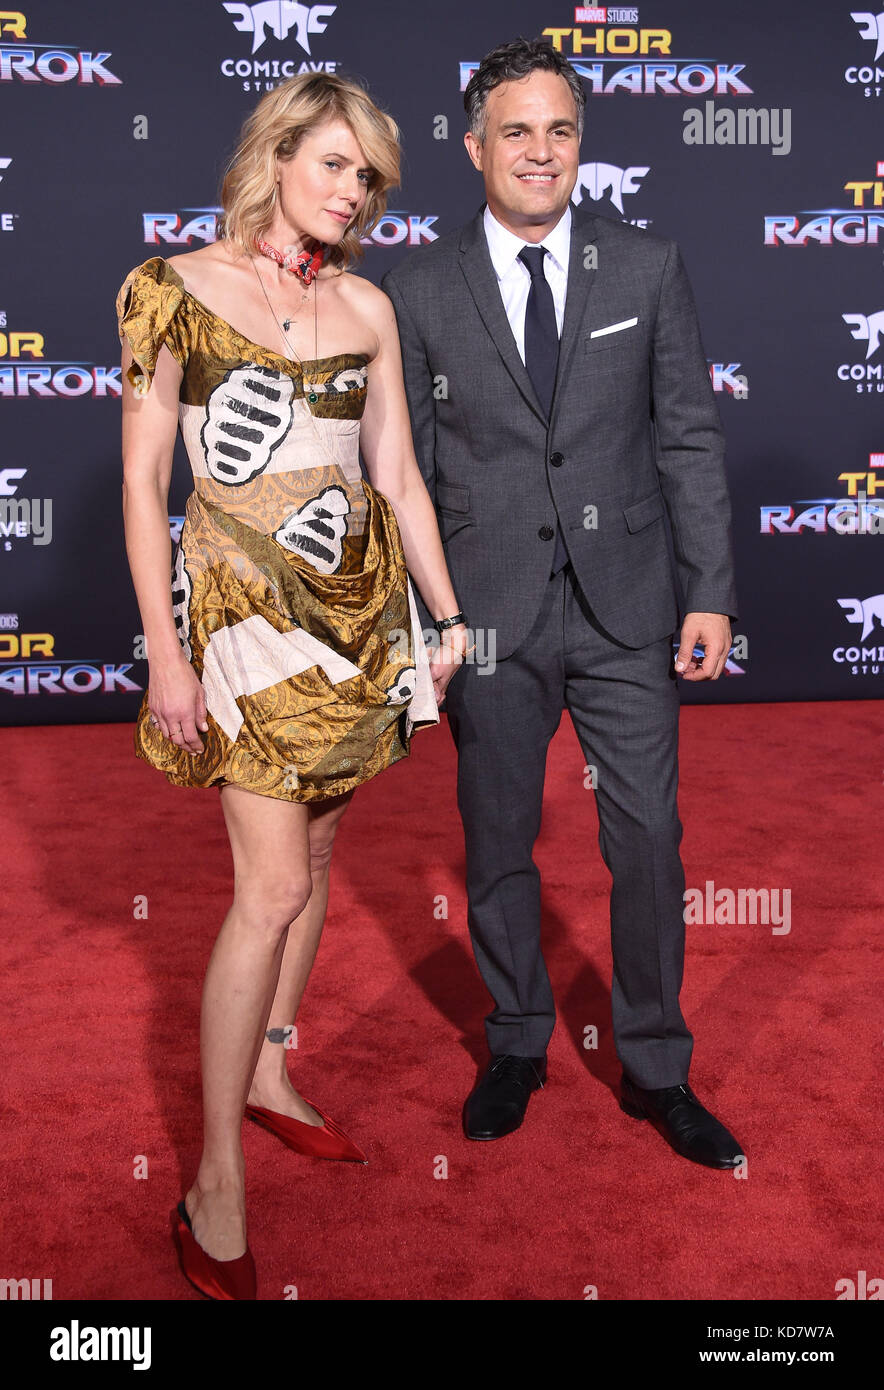 Hollywood, California, USA. 10th Oct, 2017. Mark Ruffalo and Sunrise Coigney arrives for the premiere of the film 'Thor: Ragnarok' at the El Capitan theater. Credit: Lisa O'Connor/ZUMA Wire/Alamy Live News Stock Photo